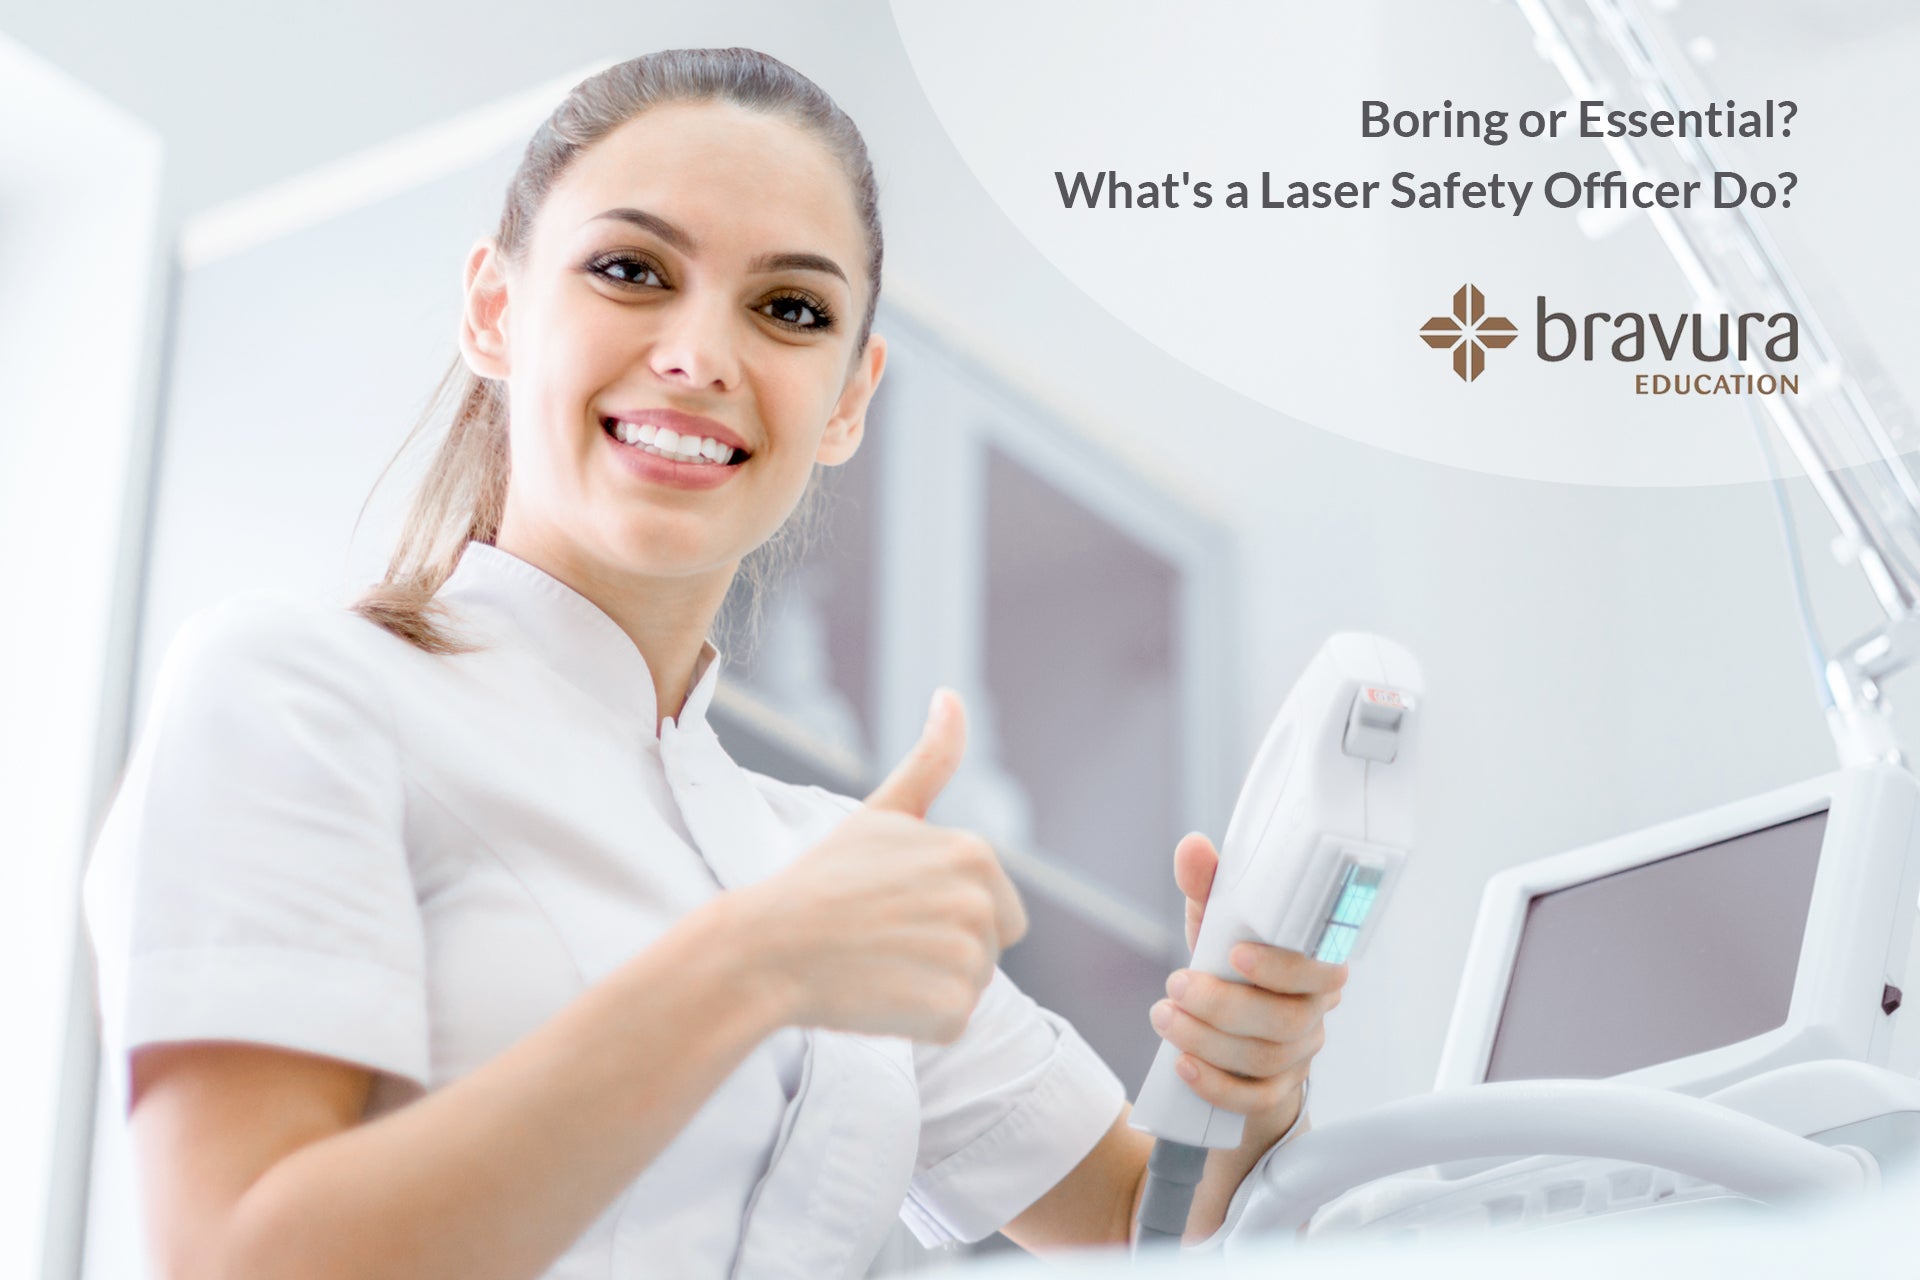 Boring or Essential? What's a Laser Safety Officer Do?